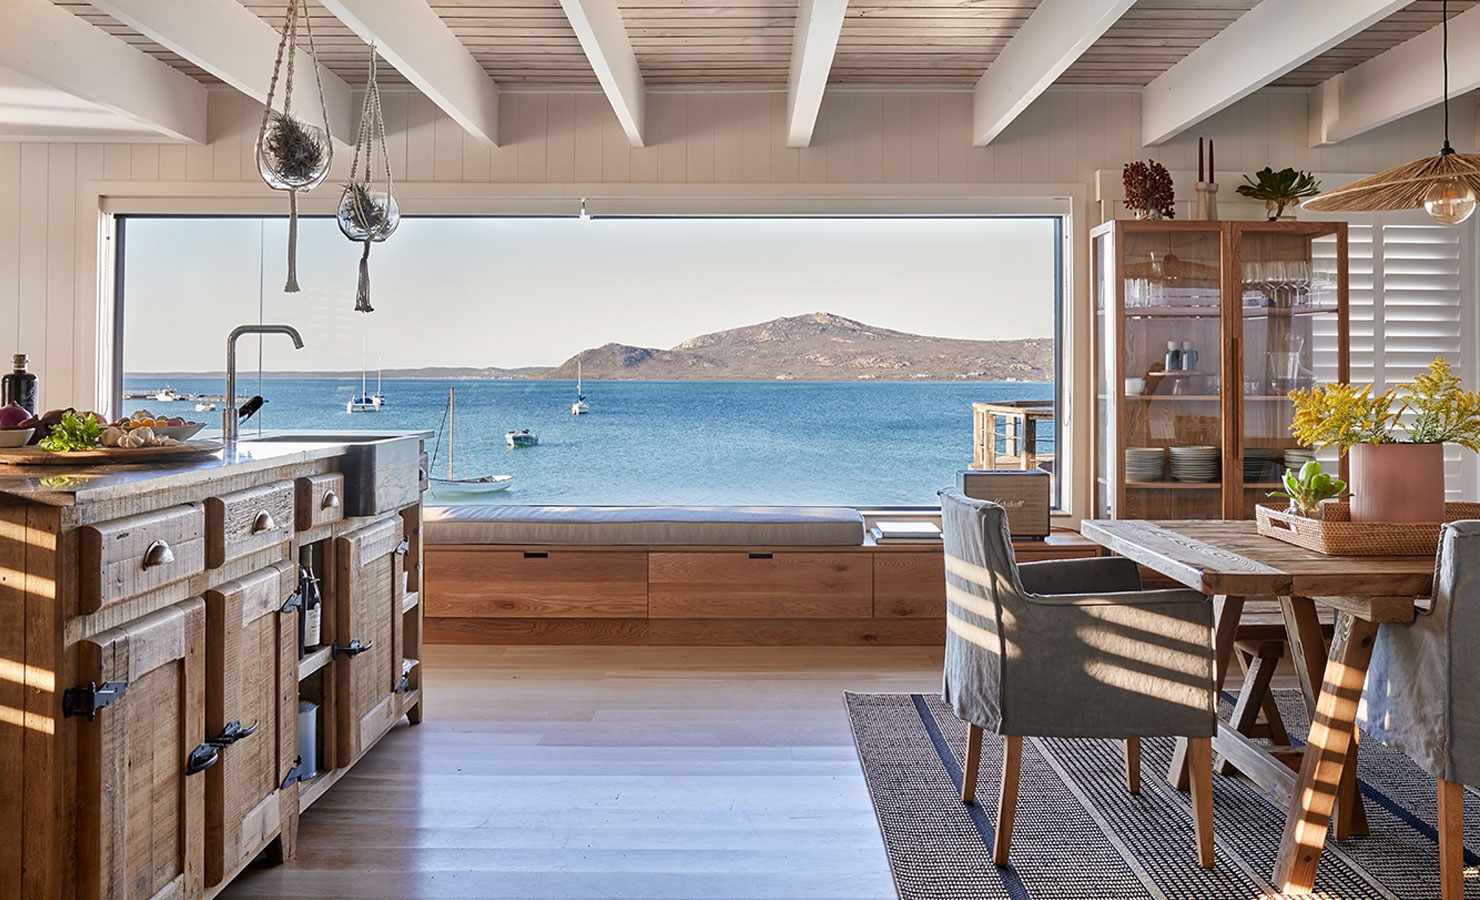 Frailann’s kitchen with a view: who wouldn’t want to cook here with friends?